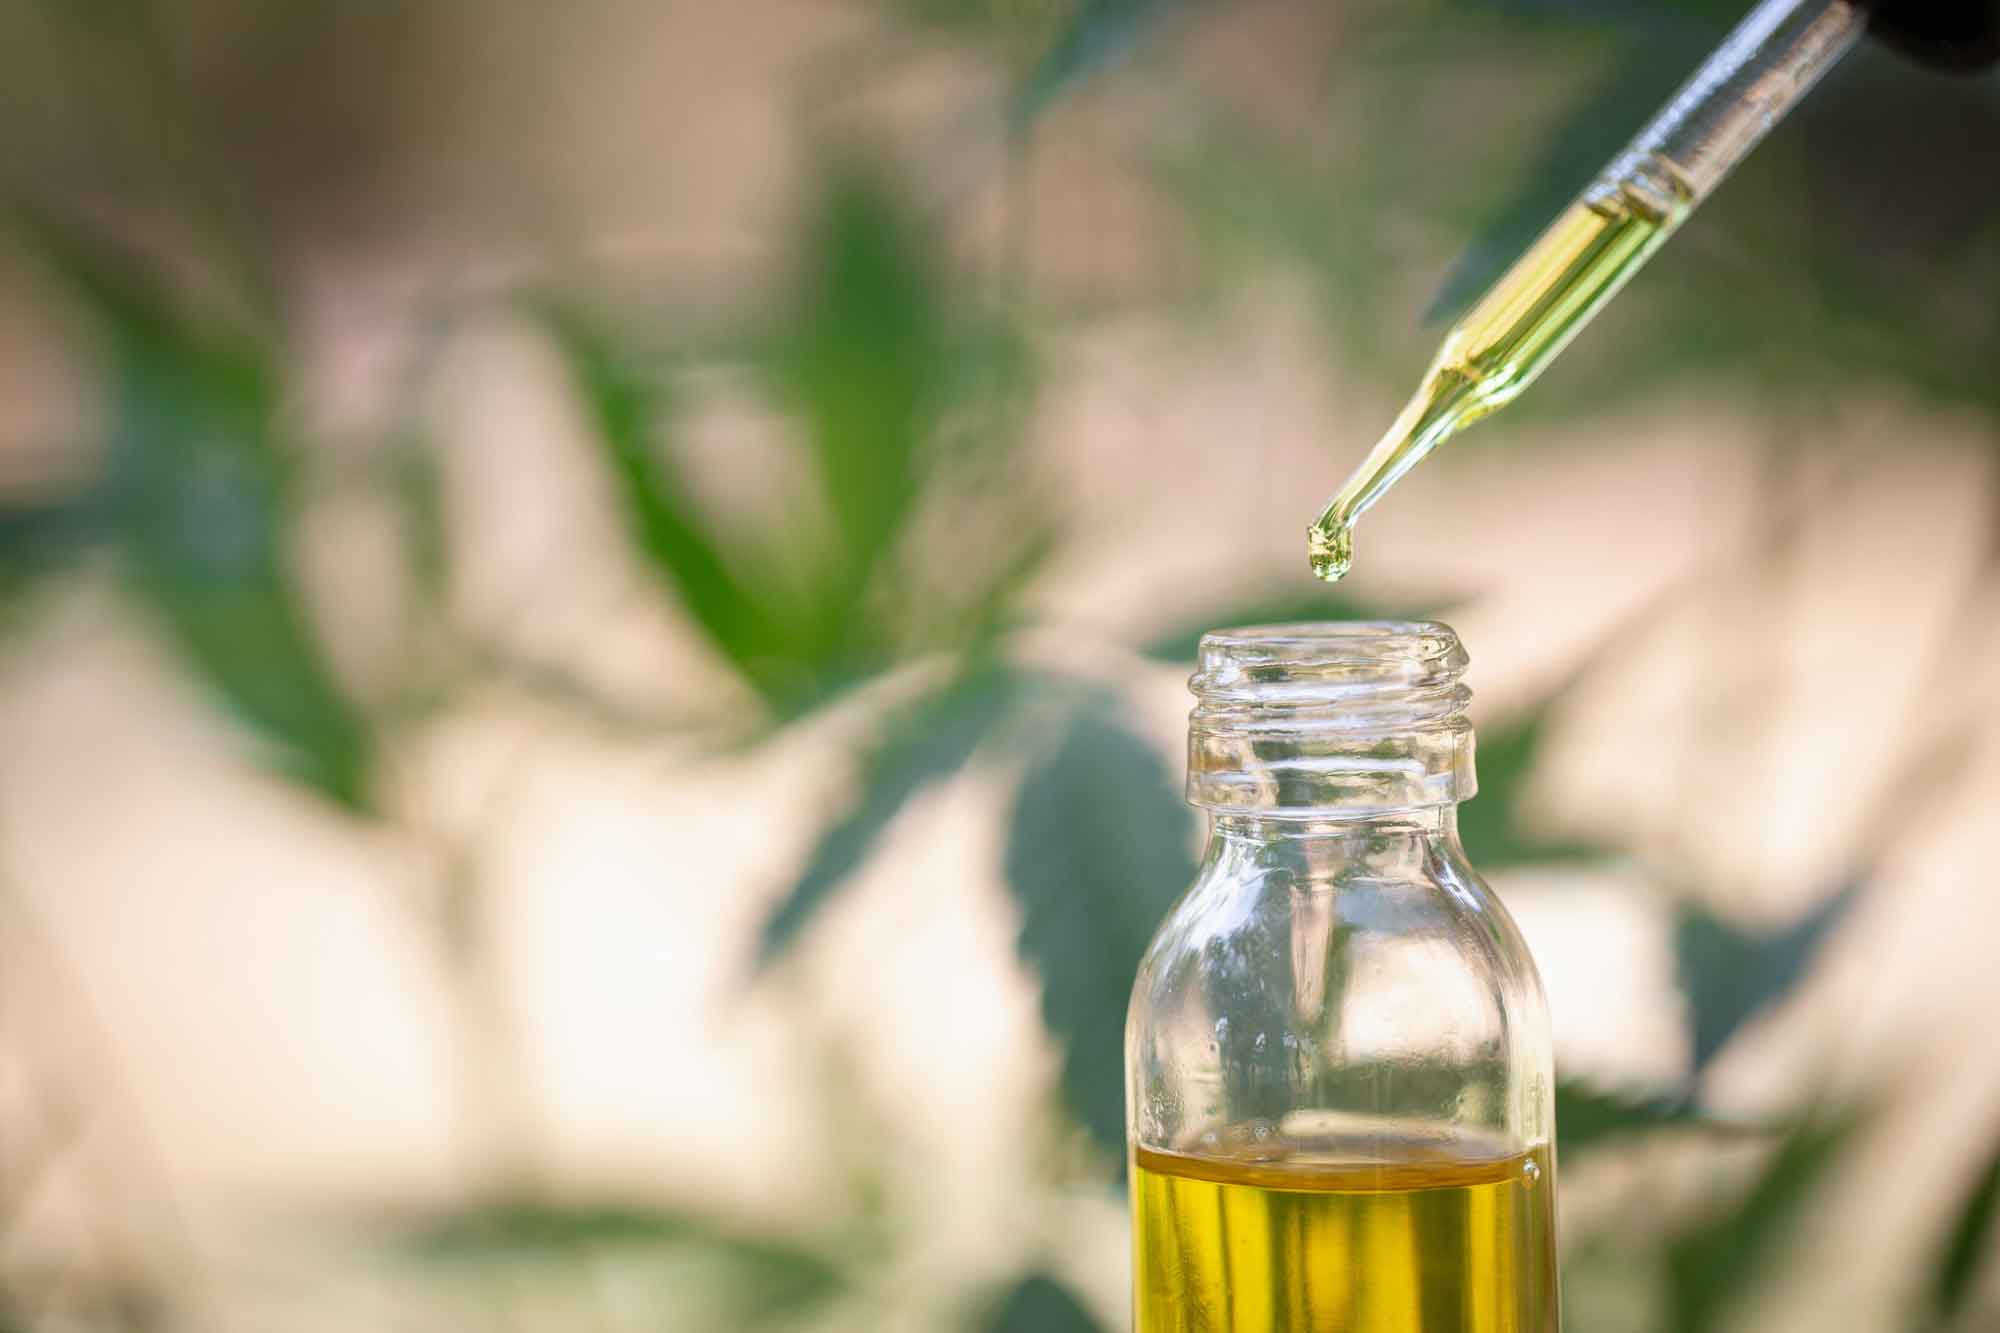 Frequently Asked Questions with Dr. Swathi - FAQ #5: Are Hemp and CBD Safe?